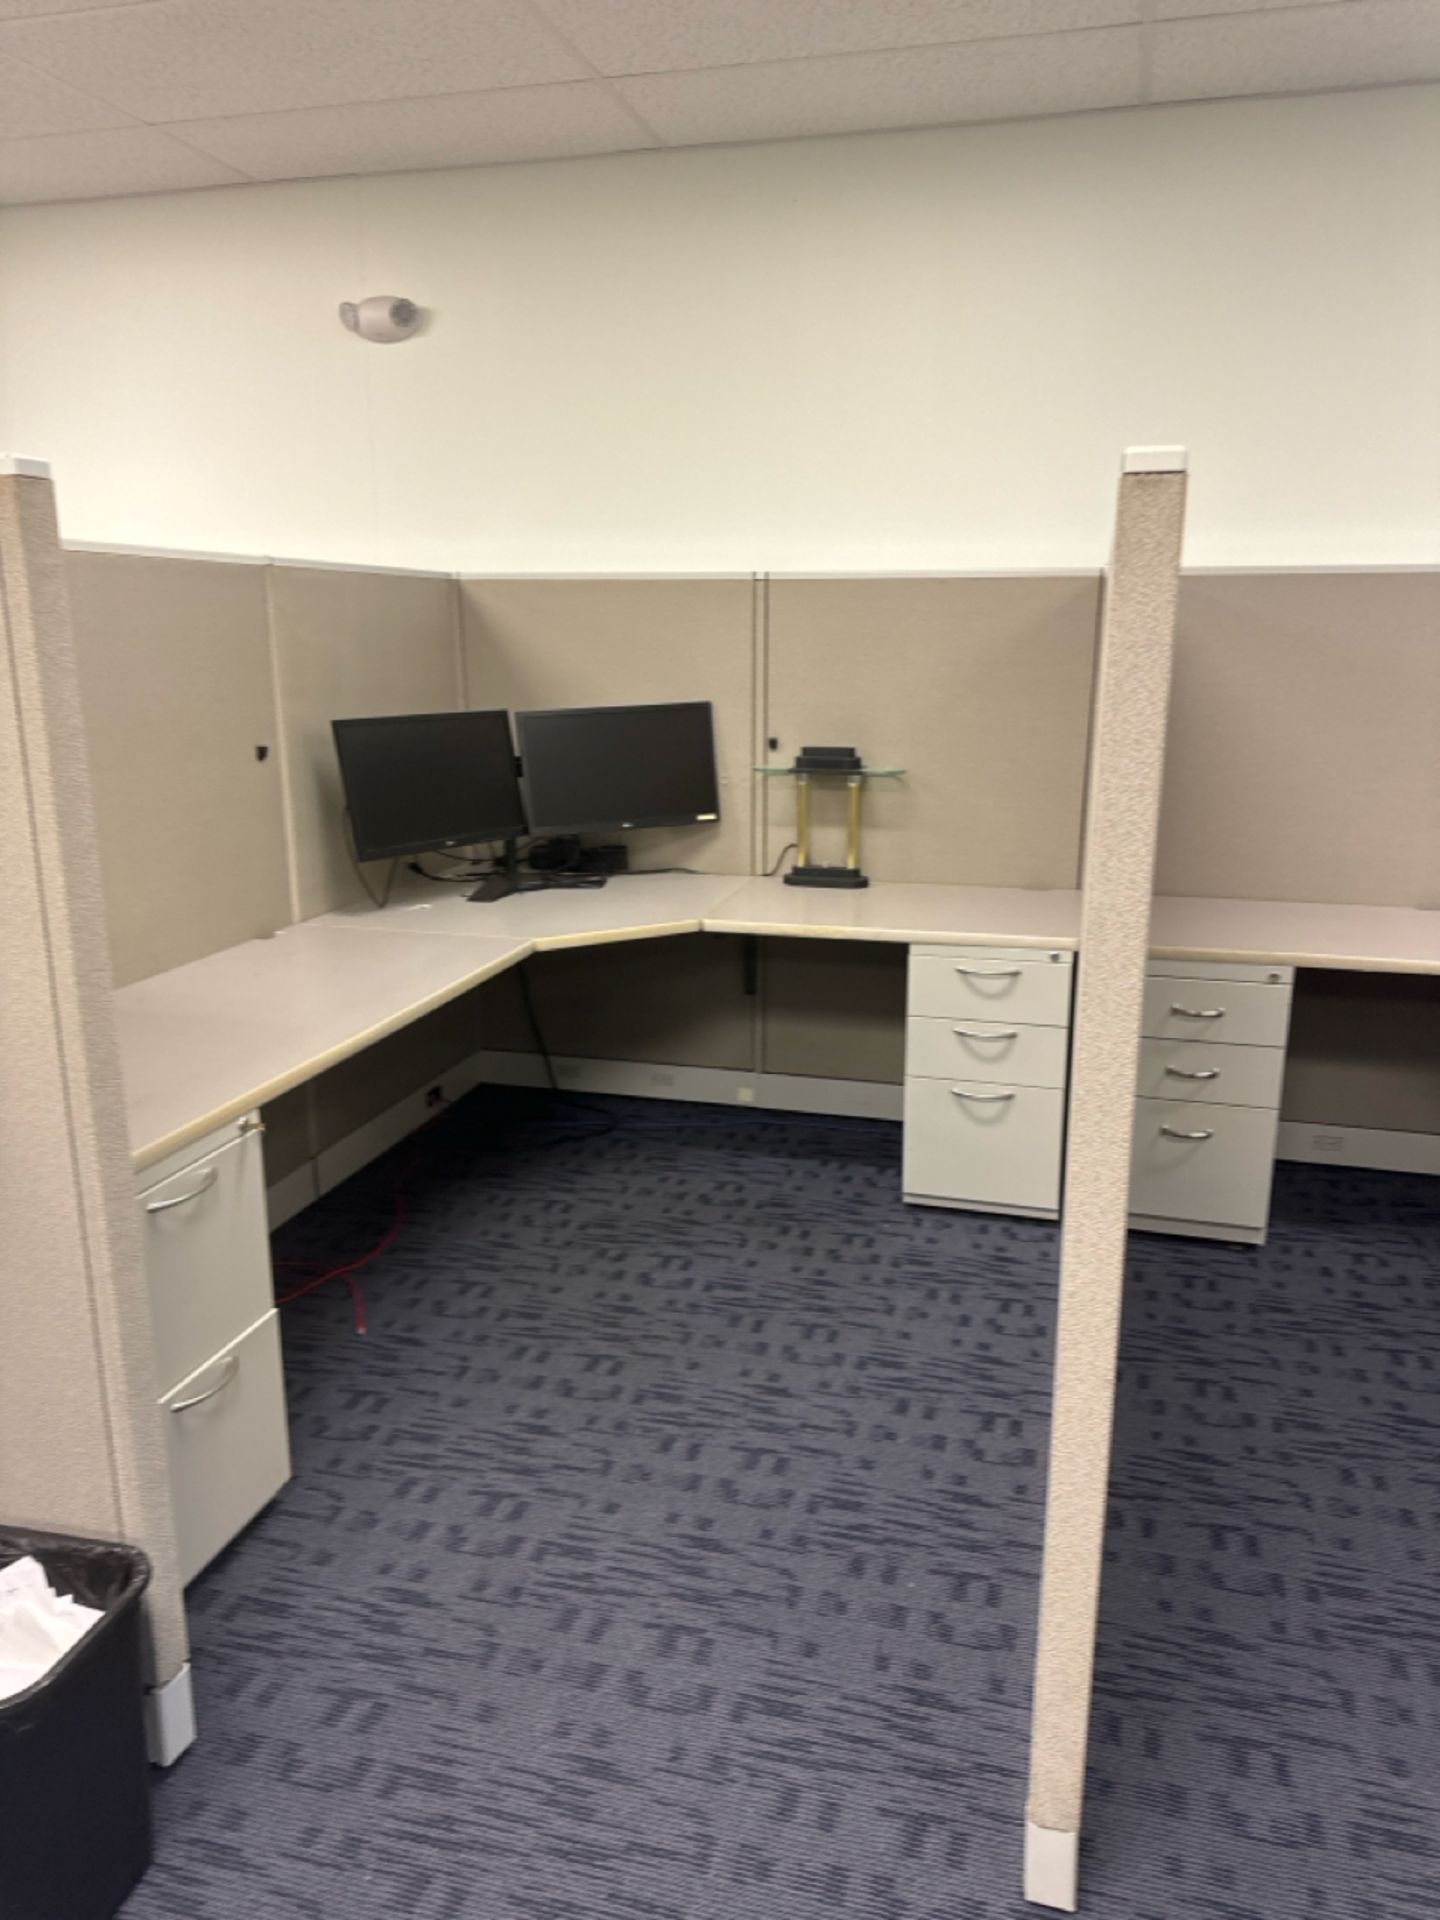 (31) ASI Panel System Work Stations (Contents not Included) - Image 16 of 23